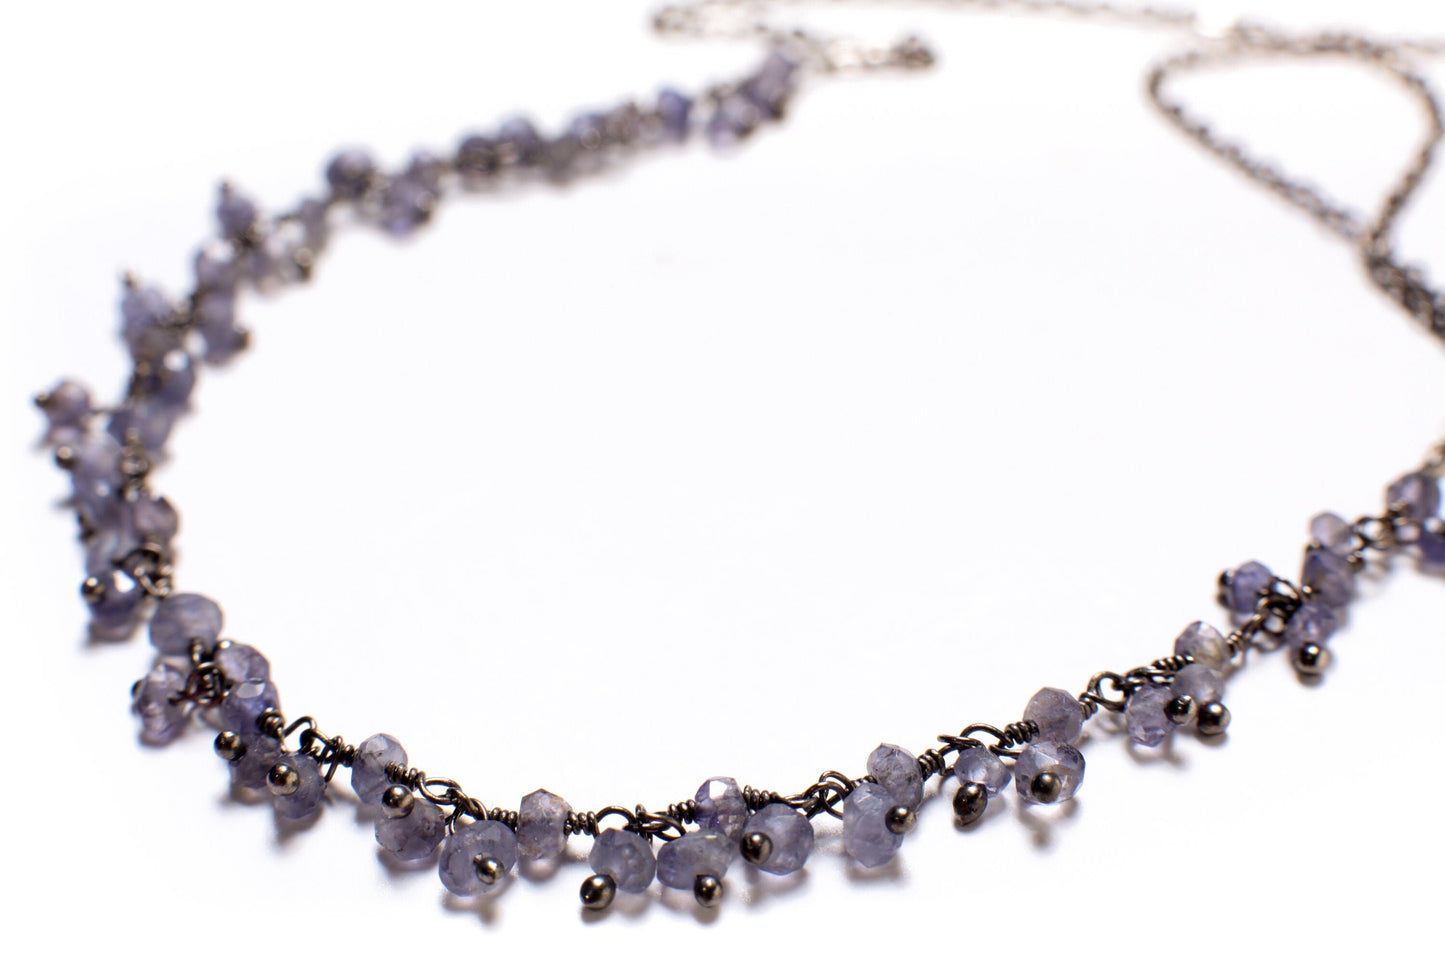 Genuine Iolite Faceted Wire Wrapped Clusters Necklace in Oxidized Silver Handmade Necklace,September Birthstone, violet blue Jewelry